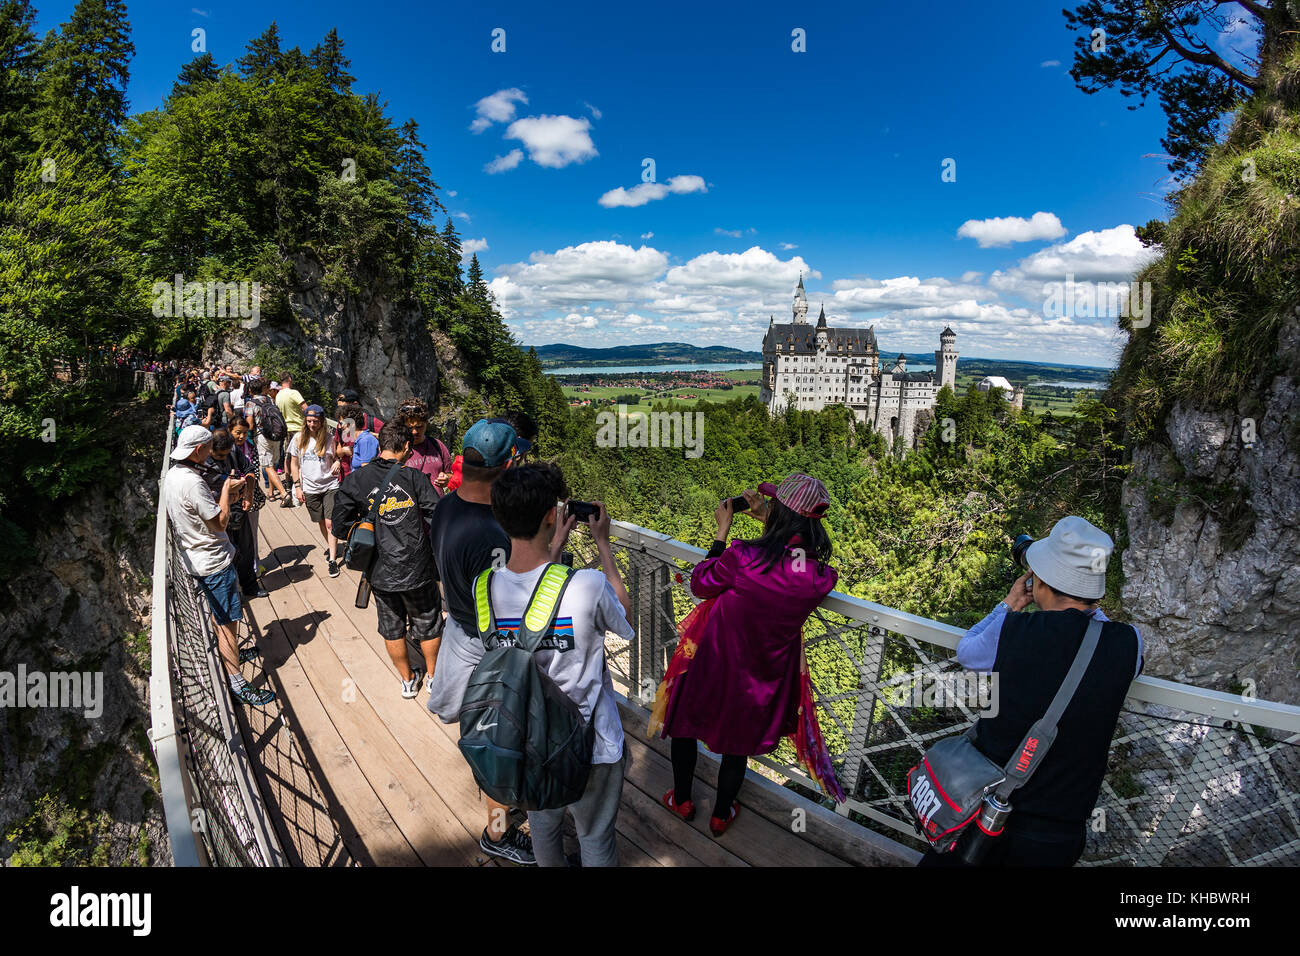 Neuschwanstein Castle, Germany - June 30, 2017: Viewing point on the bridge Neuschwanstein Castle The castle was intended as a home for the king, unti Stock Photo